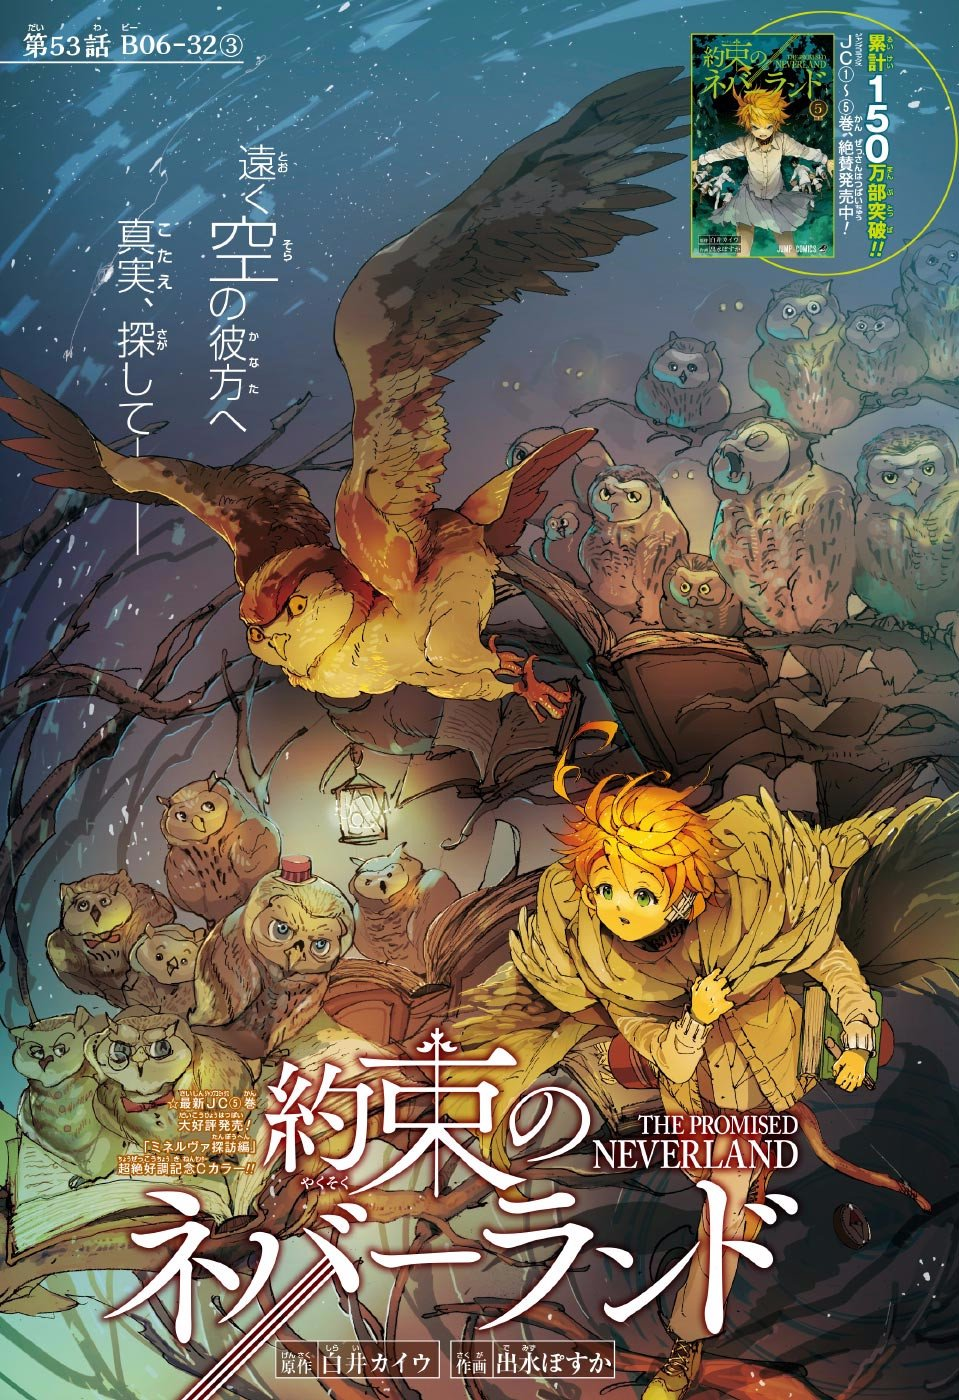 The Promised Neverland for Manga Readers, Episode 5 – Beneath the Tangles